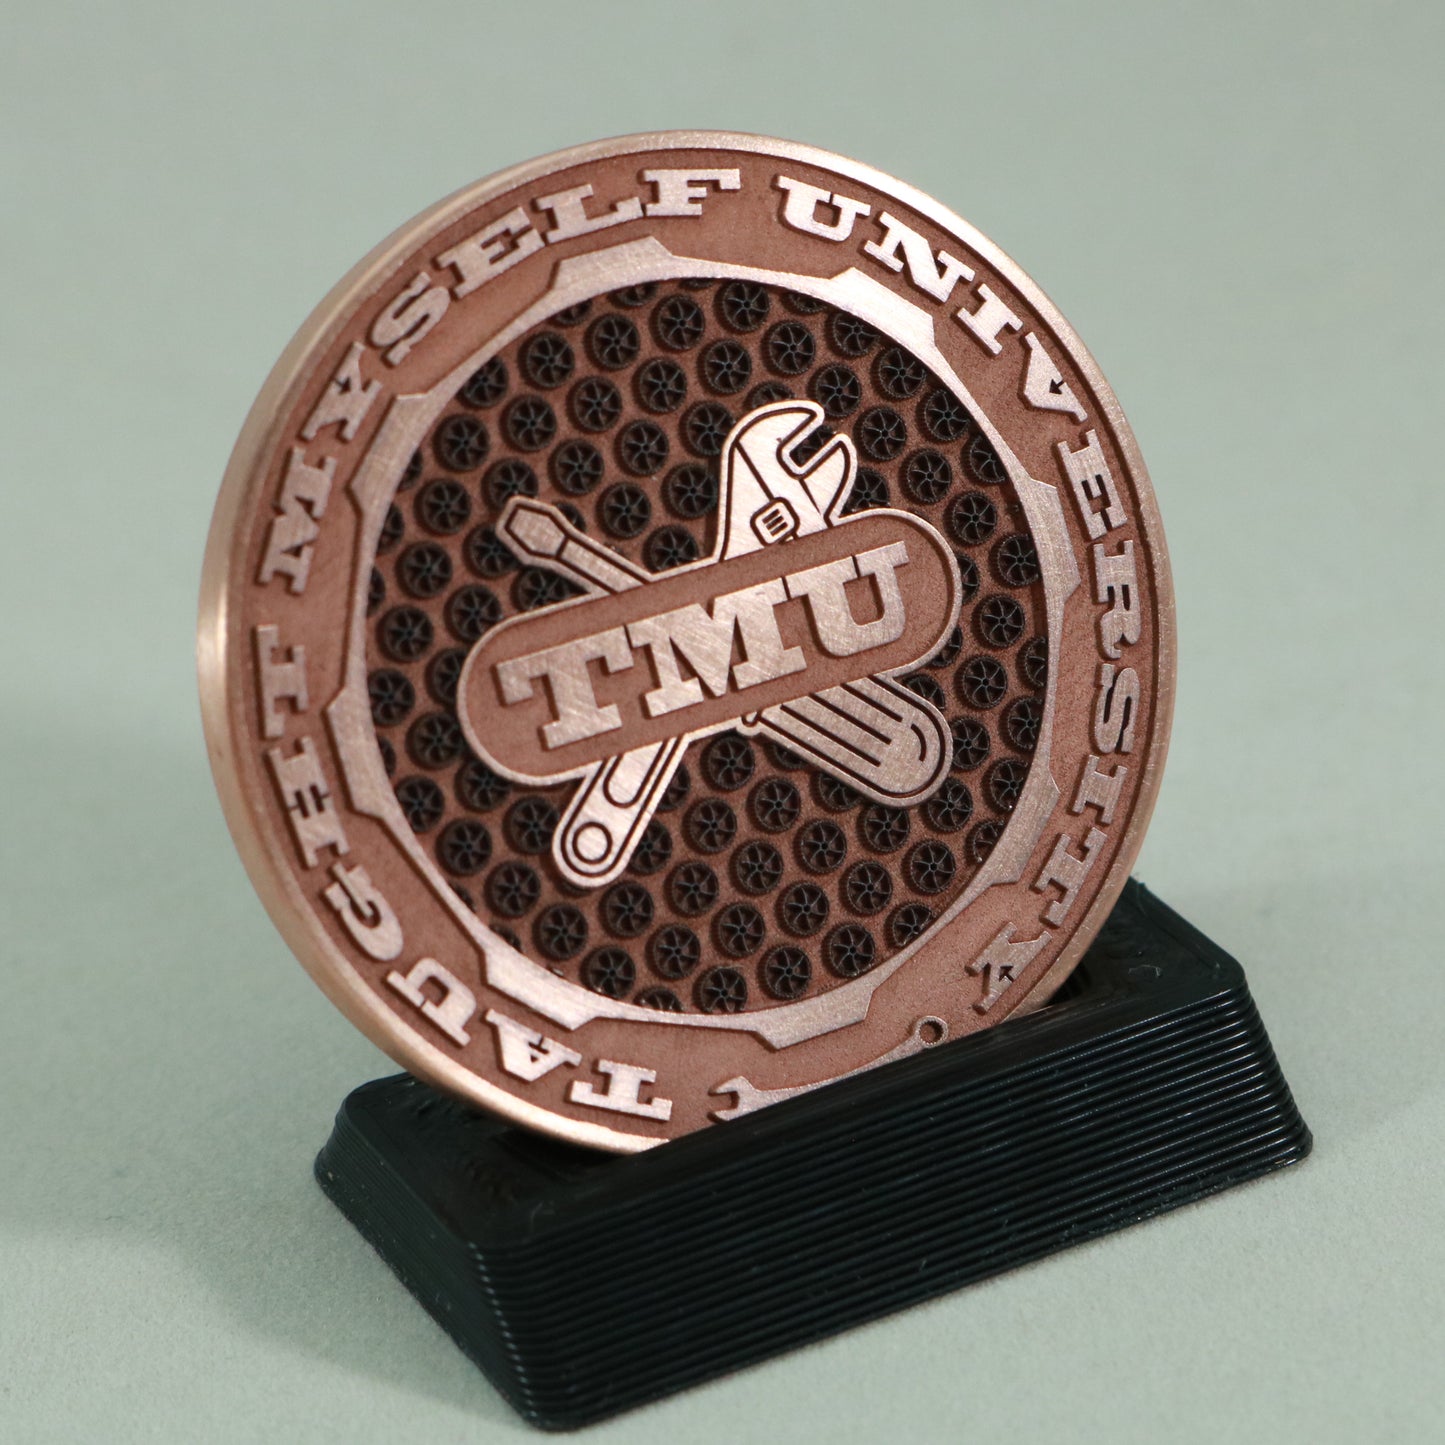 Taught Myself University Antique Finish Coin